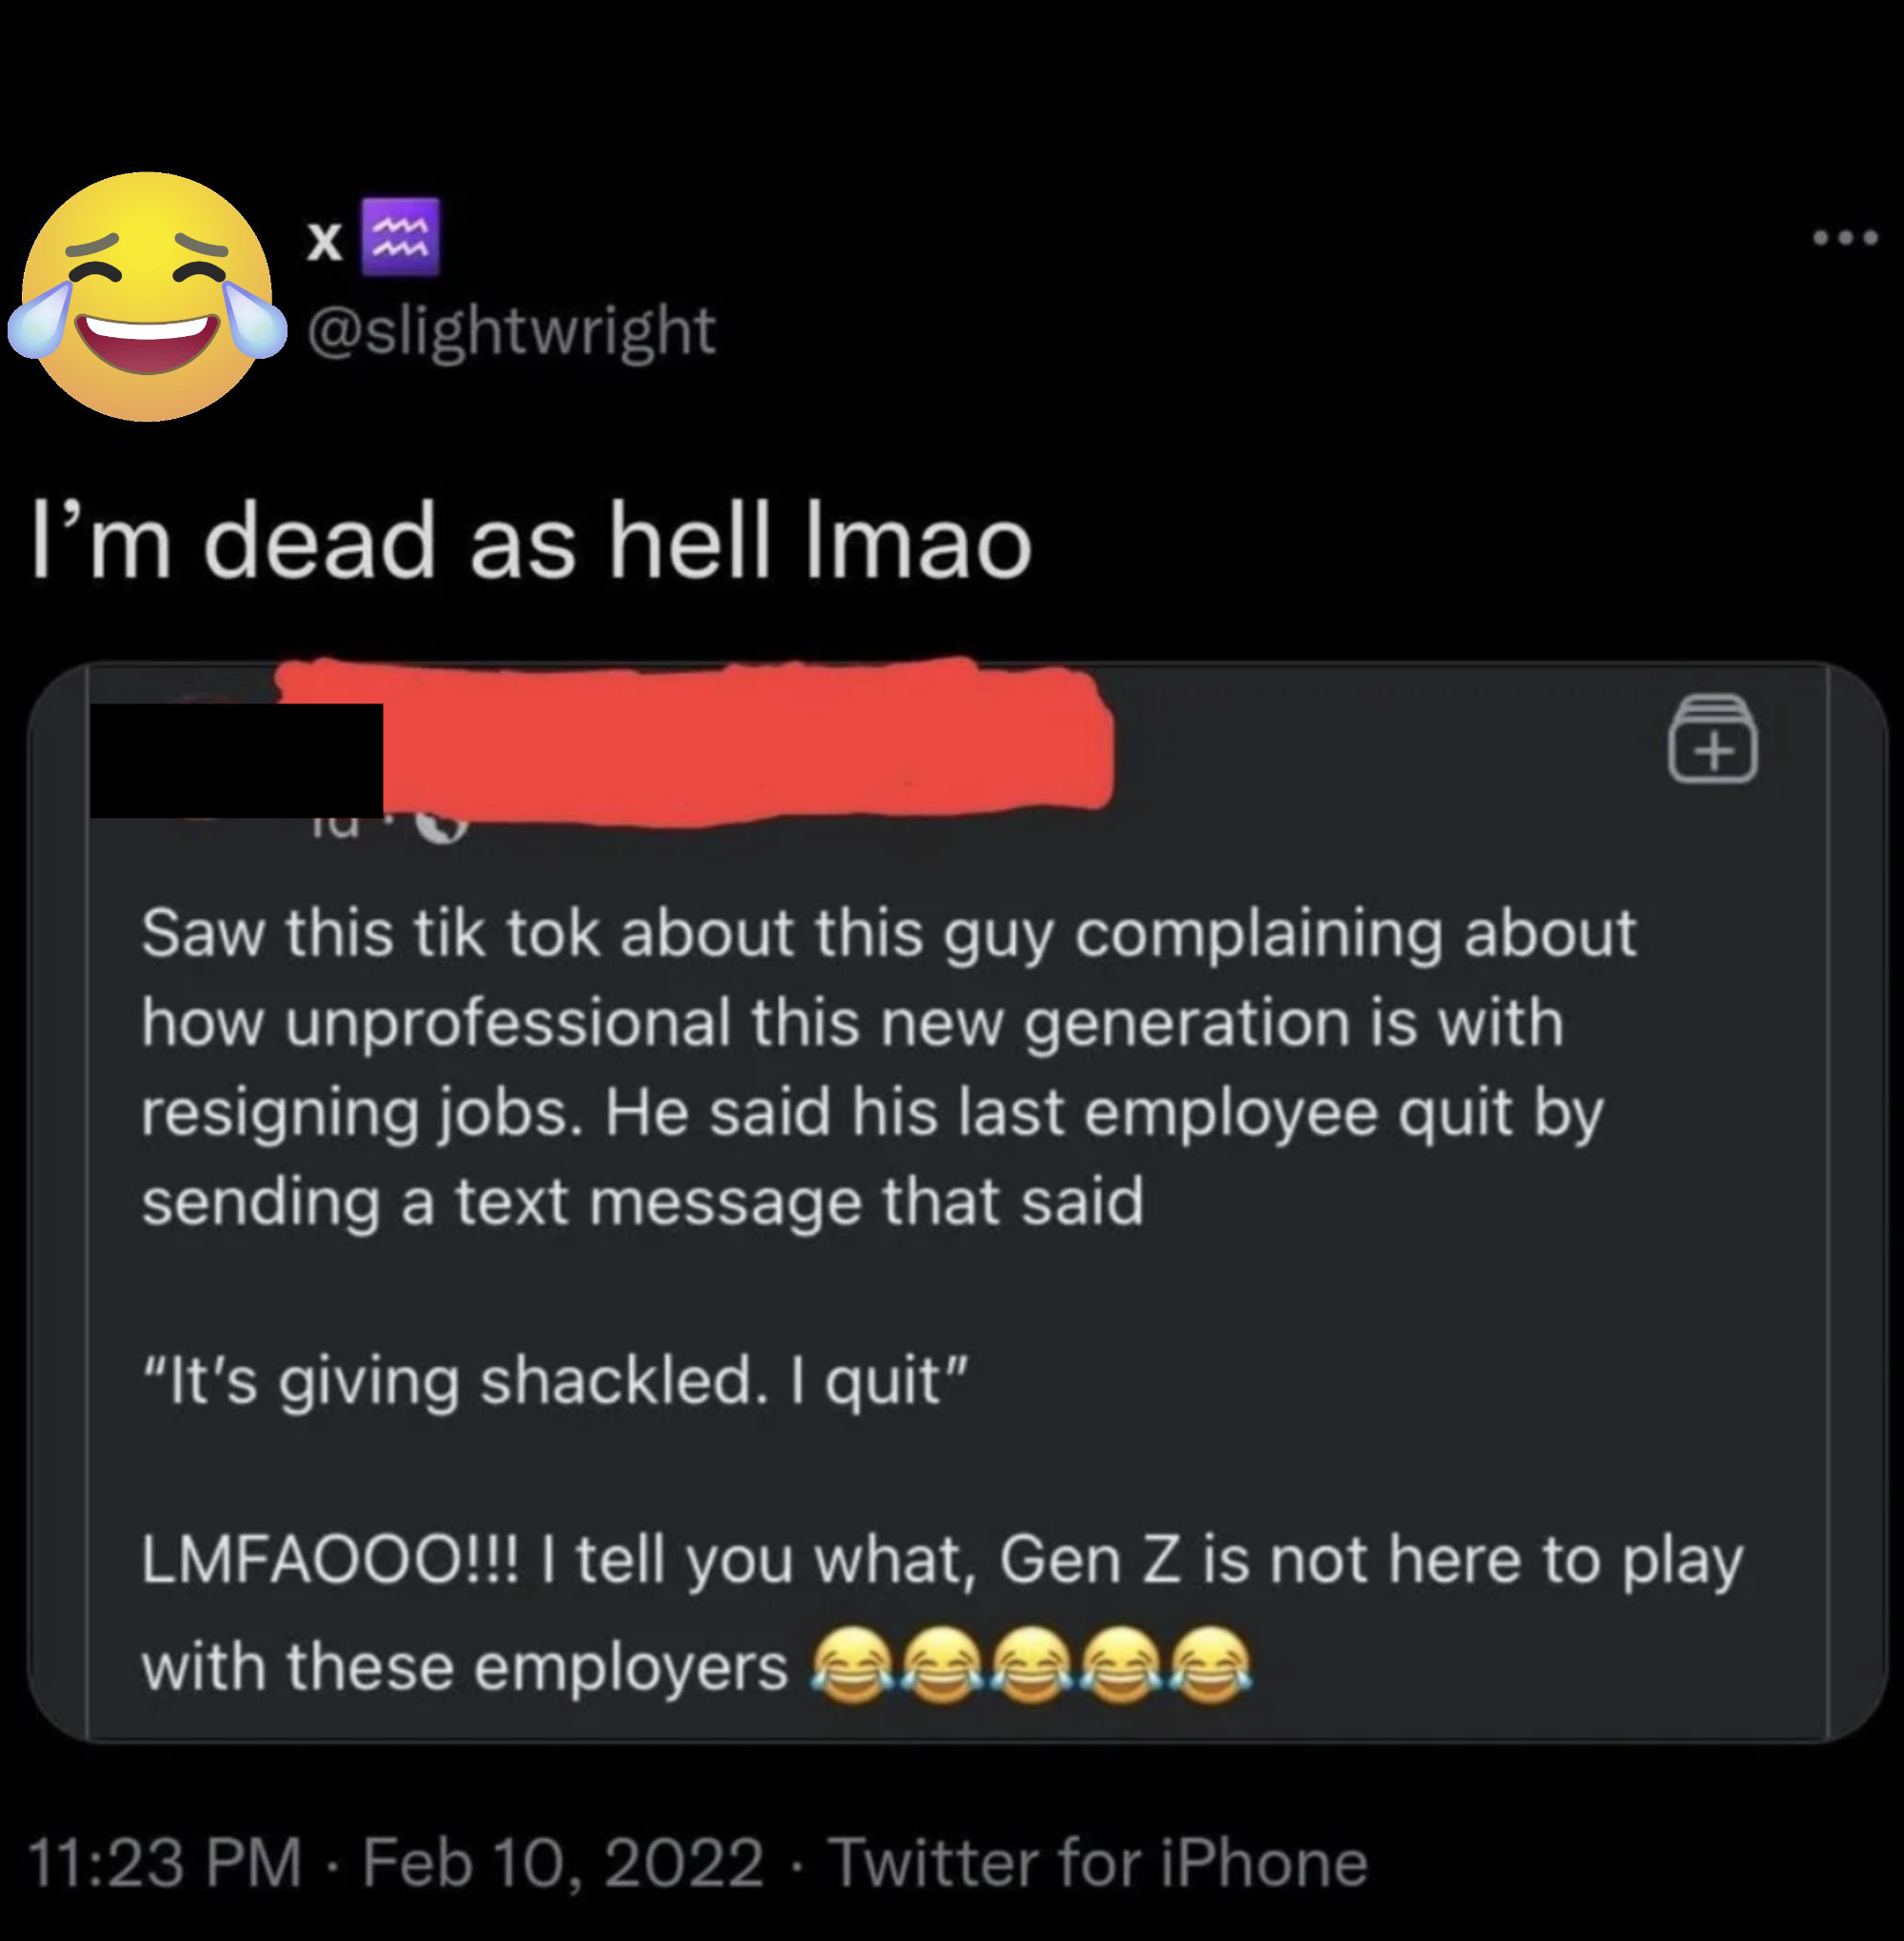 Post with the writer saying, &quot;saw this tik tok about this guy complaining about how unprofessional this new generation is with resigning jobs. He said his last employee quit by sending a text message...&quot;